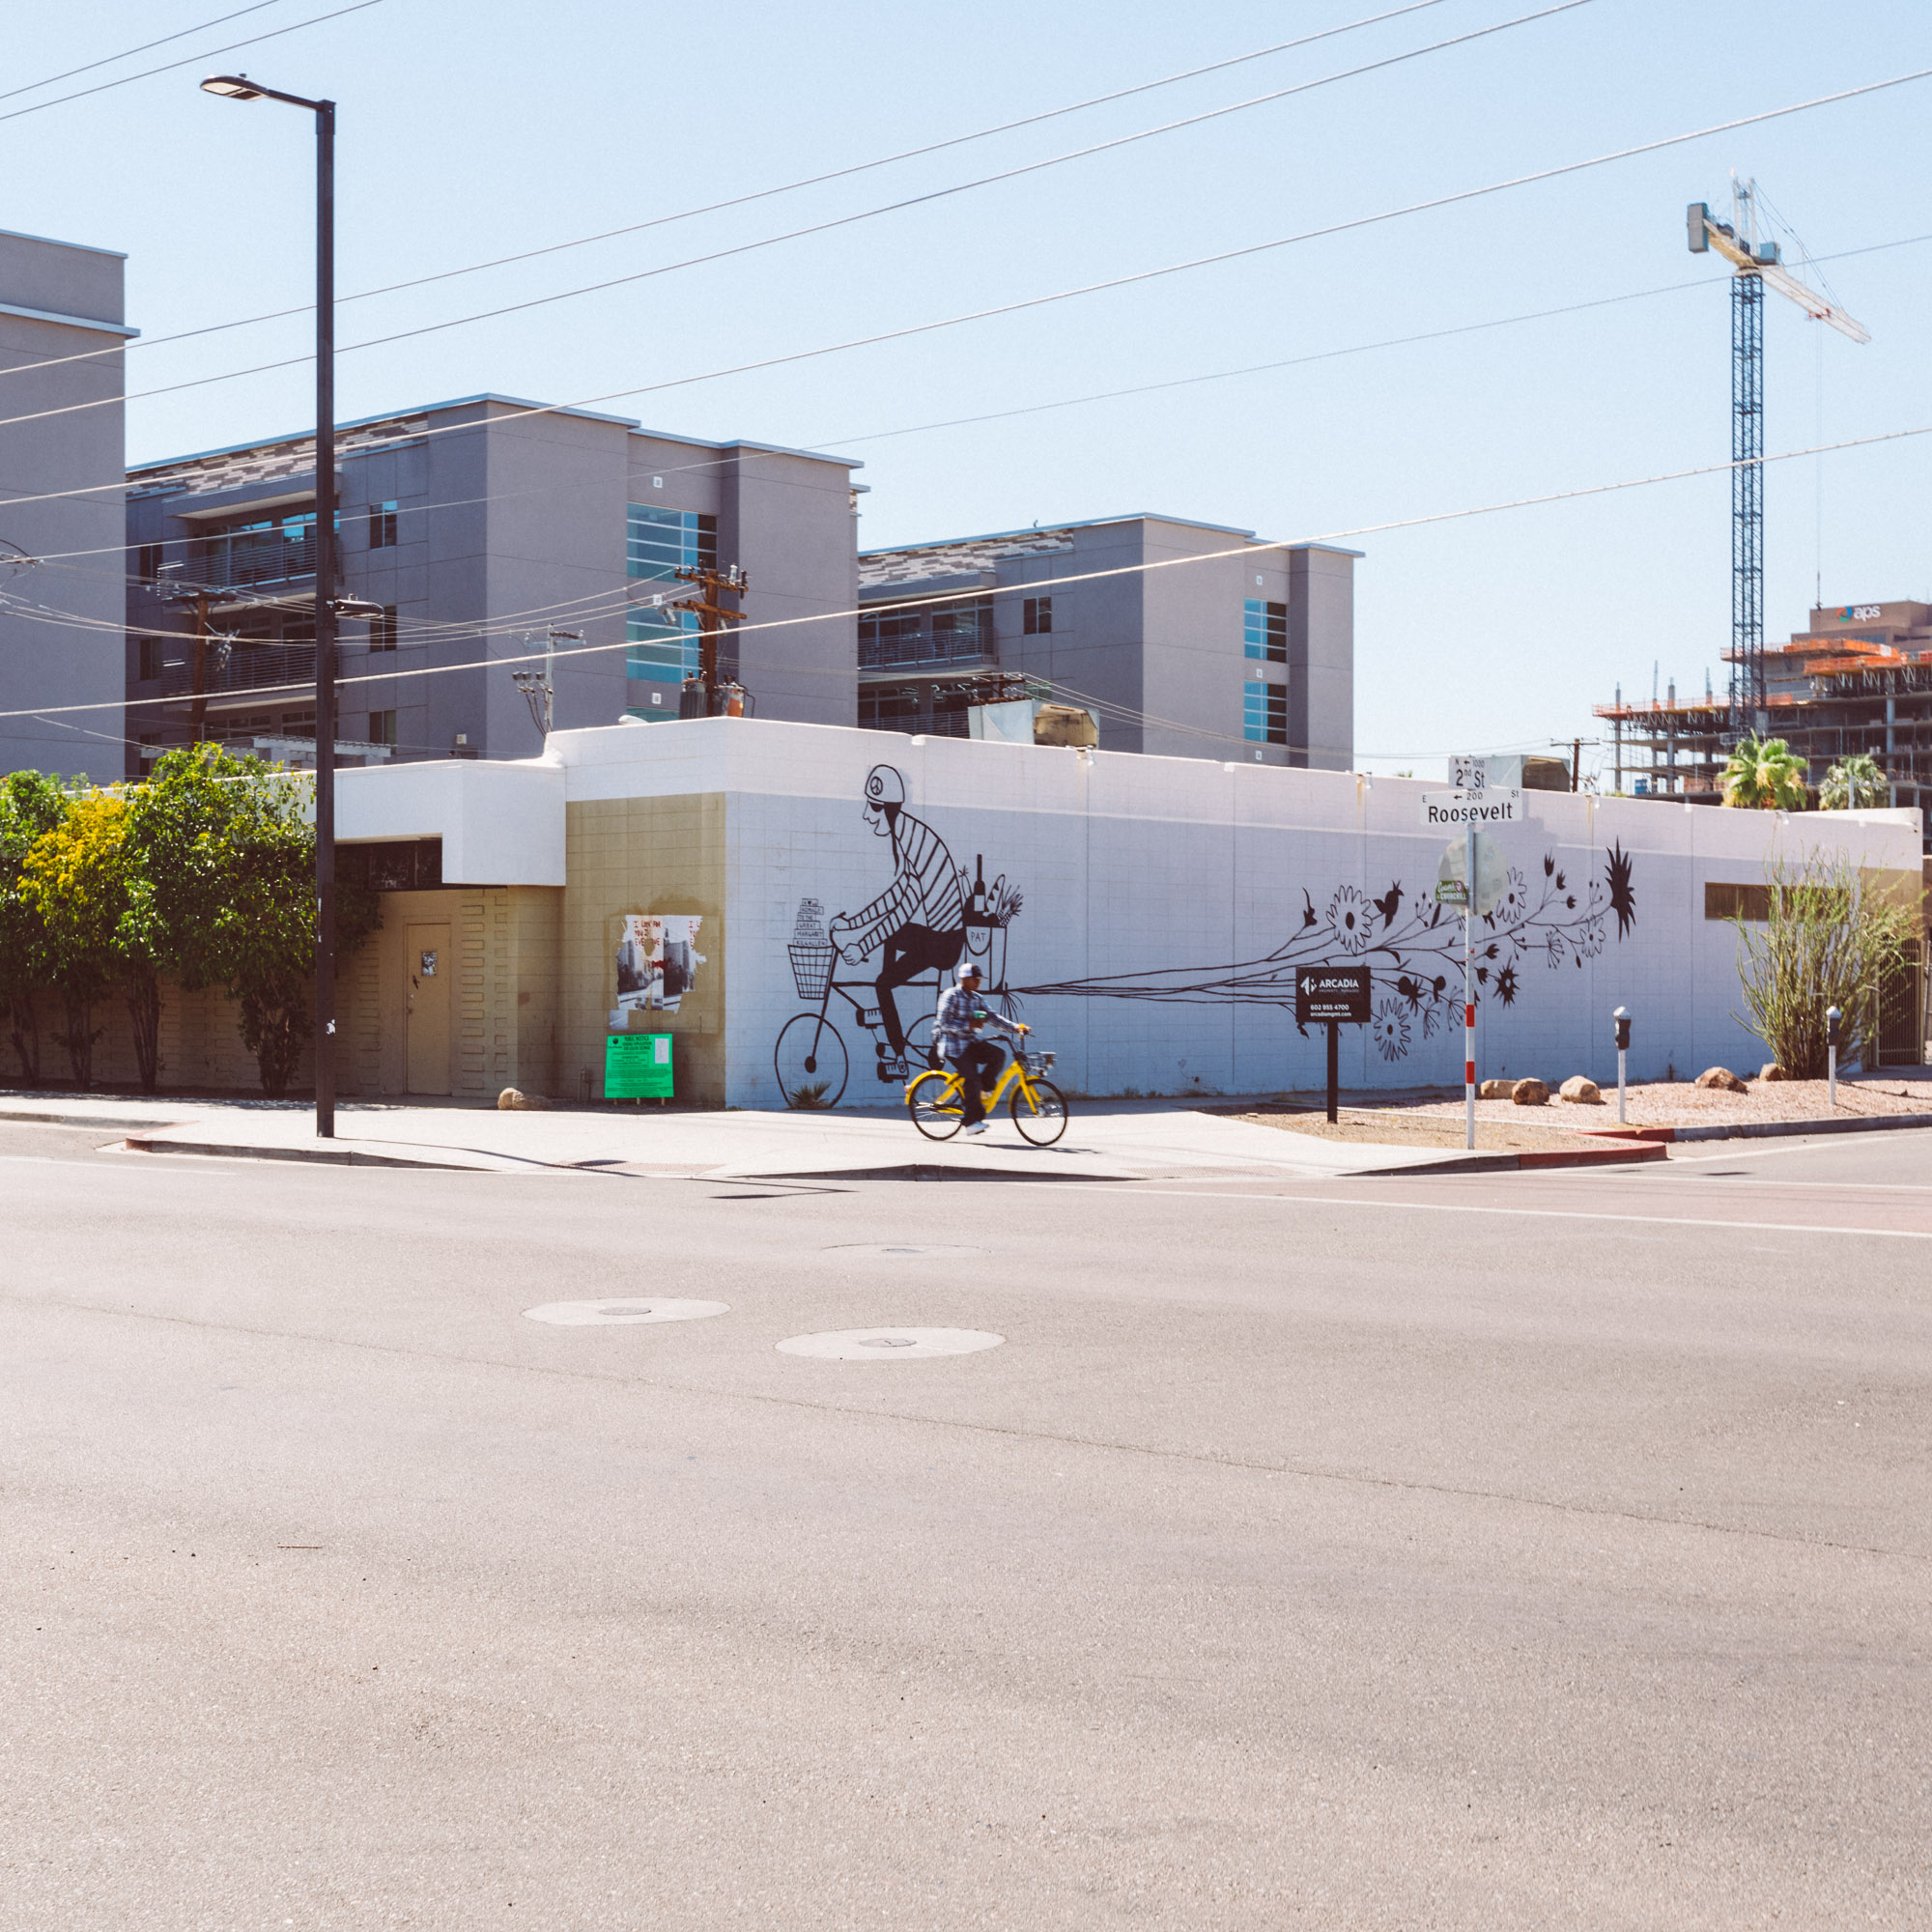 Things To Do In Phoenix — Roosevelt Row Arts District — Jeff On The Road — All photos are under Copyright  © 2019 Jeff Frenette Photography / dezjeff. To use the photos, please contact me at dezjeff@me.com.